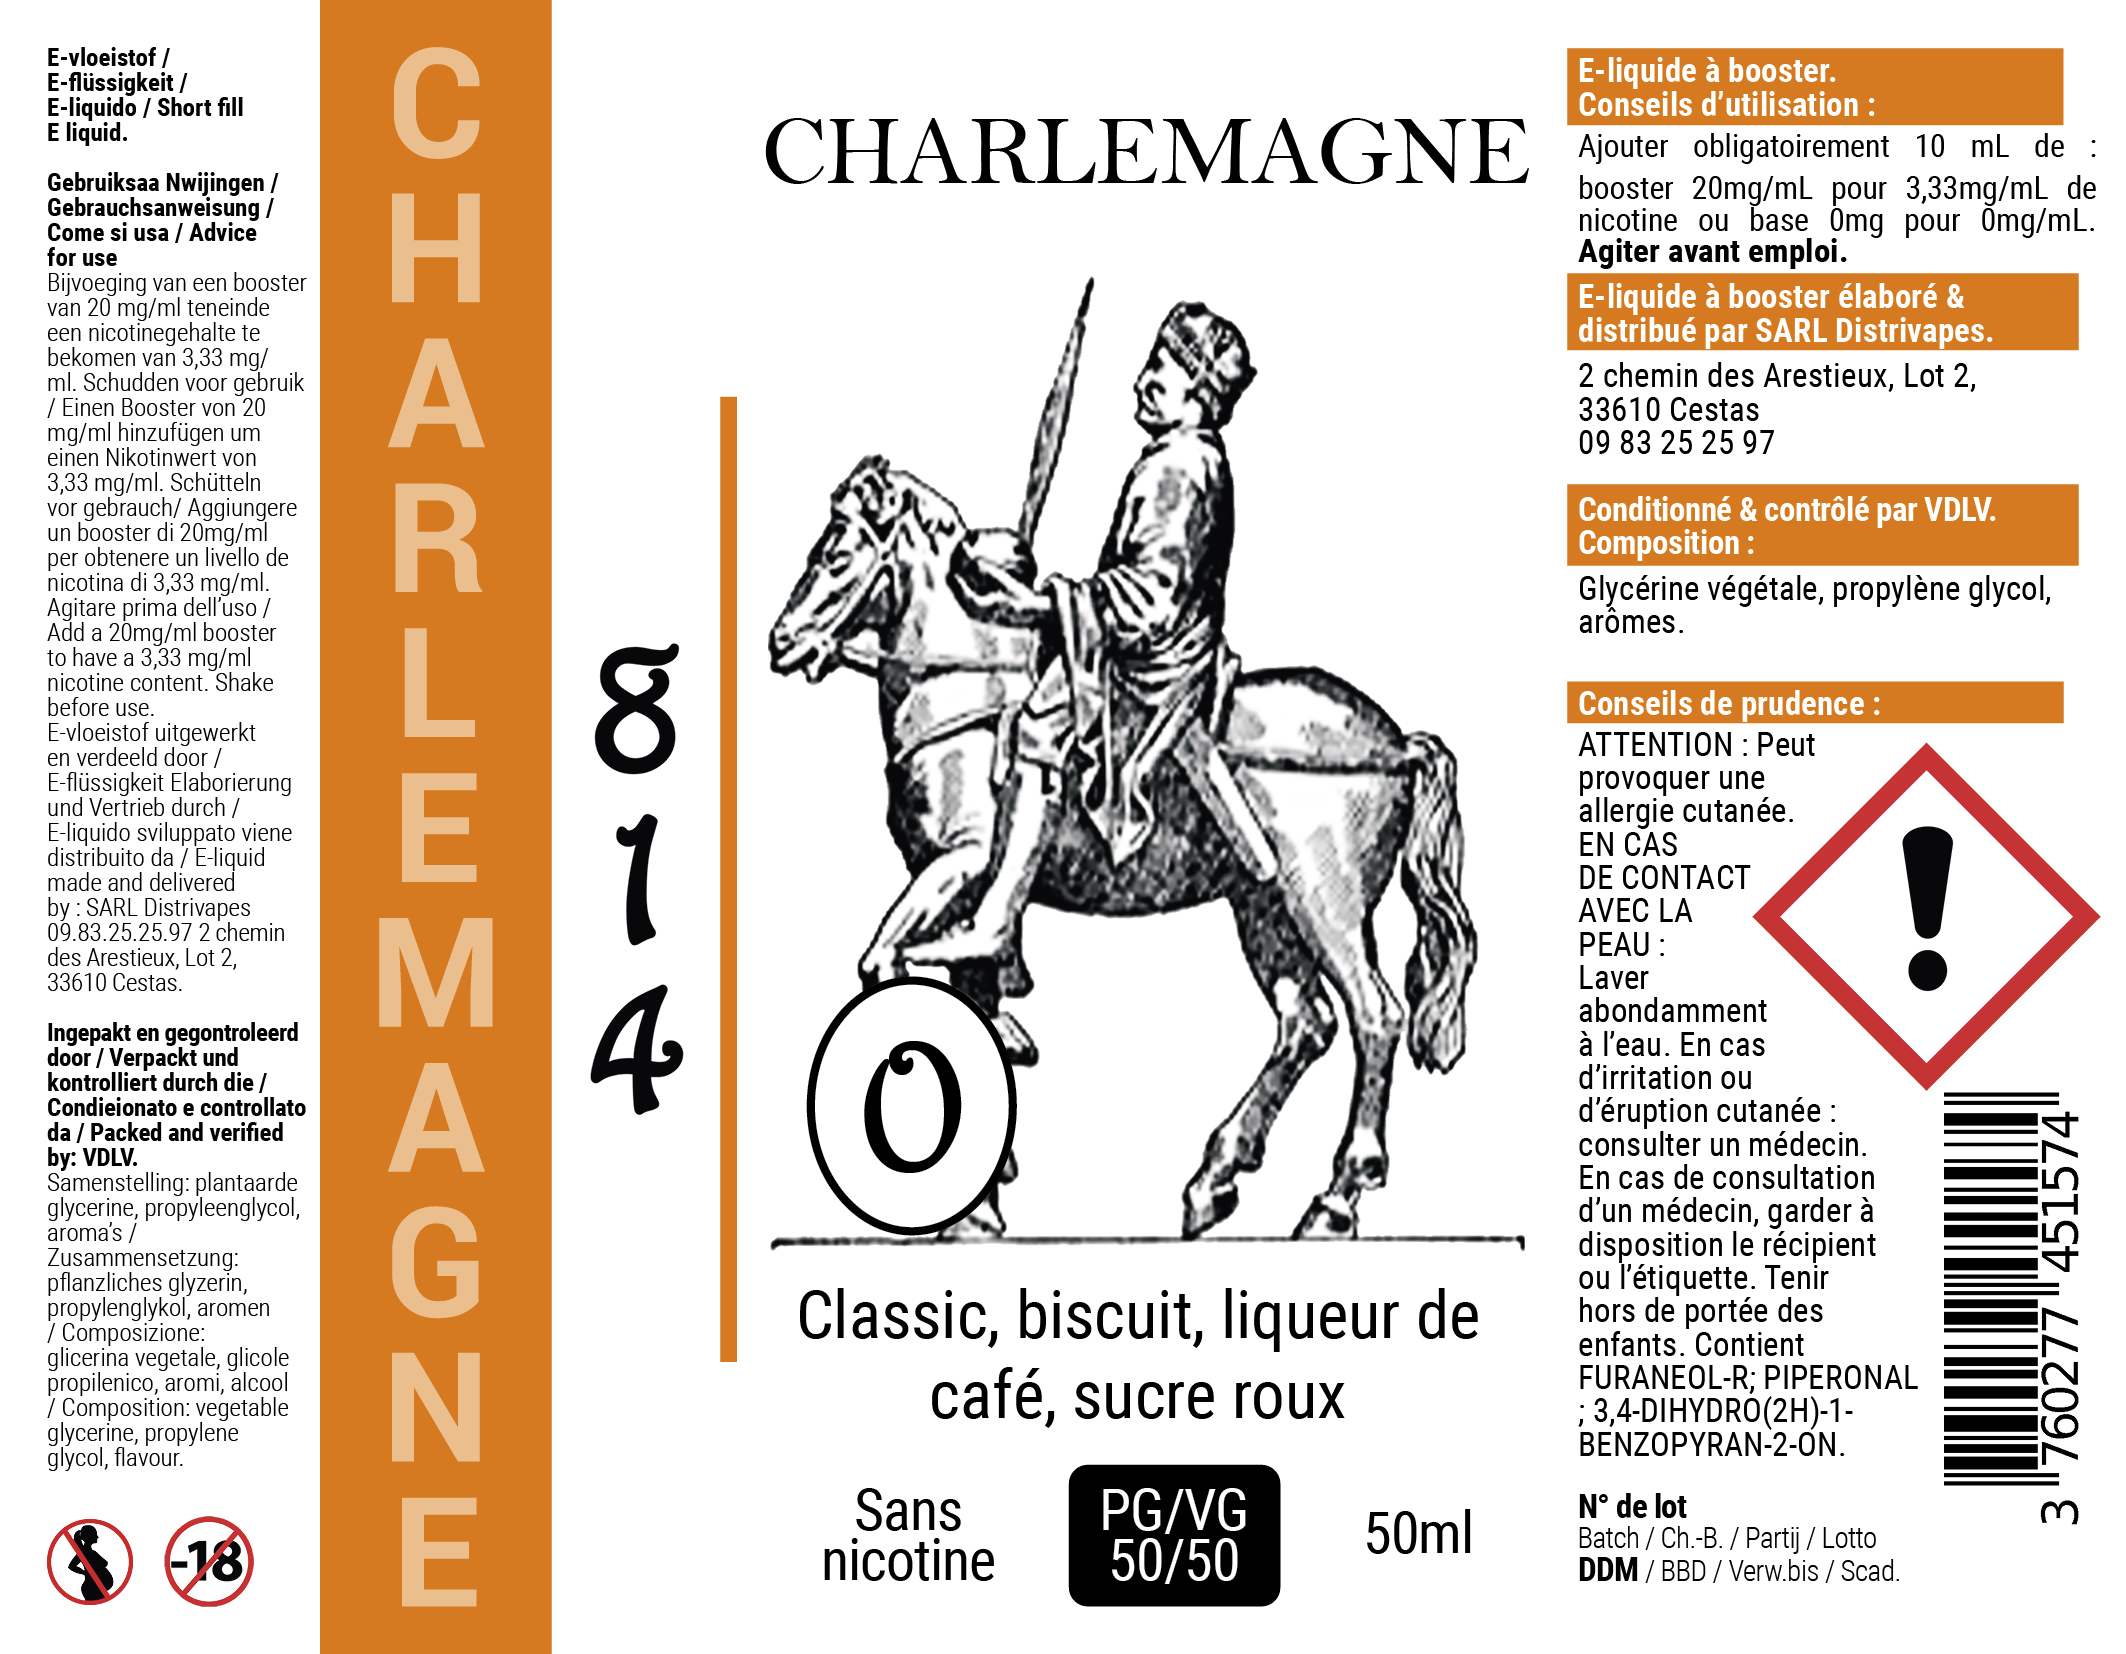 814_Etiquettes_boost_50ml_Charlemagne